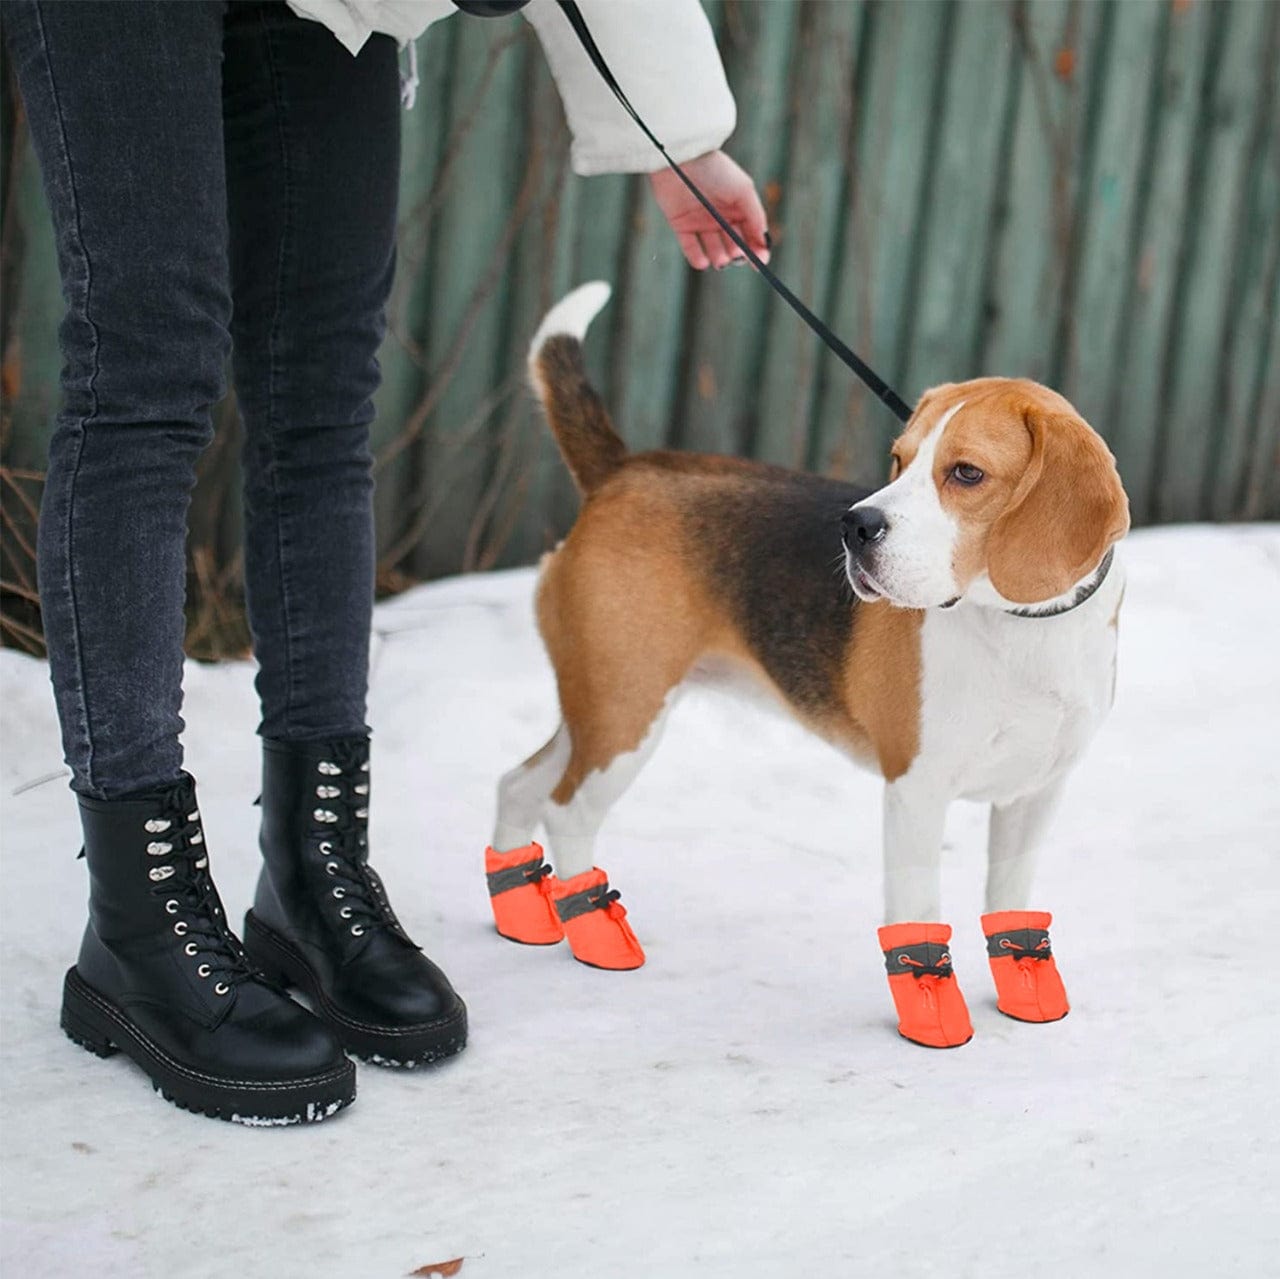 KUTKUT Washable Dog Boots Paw Protector for Hot Pavement | 1 Pair Pack of 4pcs Anti-Slip Dog Shoes with Reflective Straps for Small Dogs (Orange) - kutkutstyle